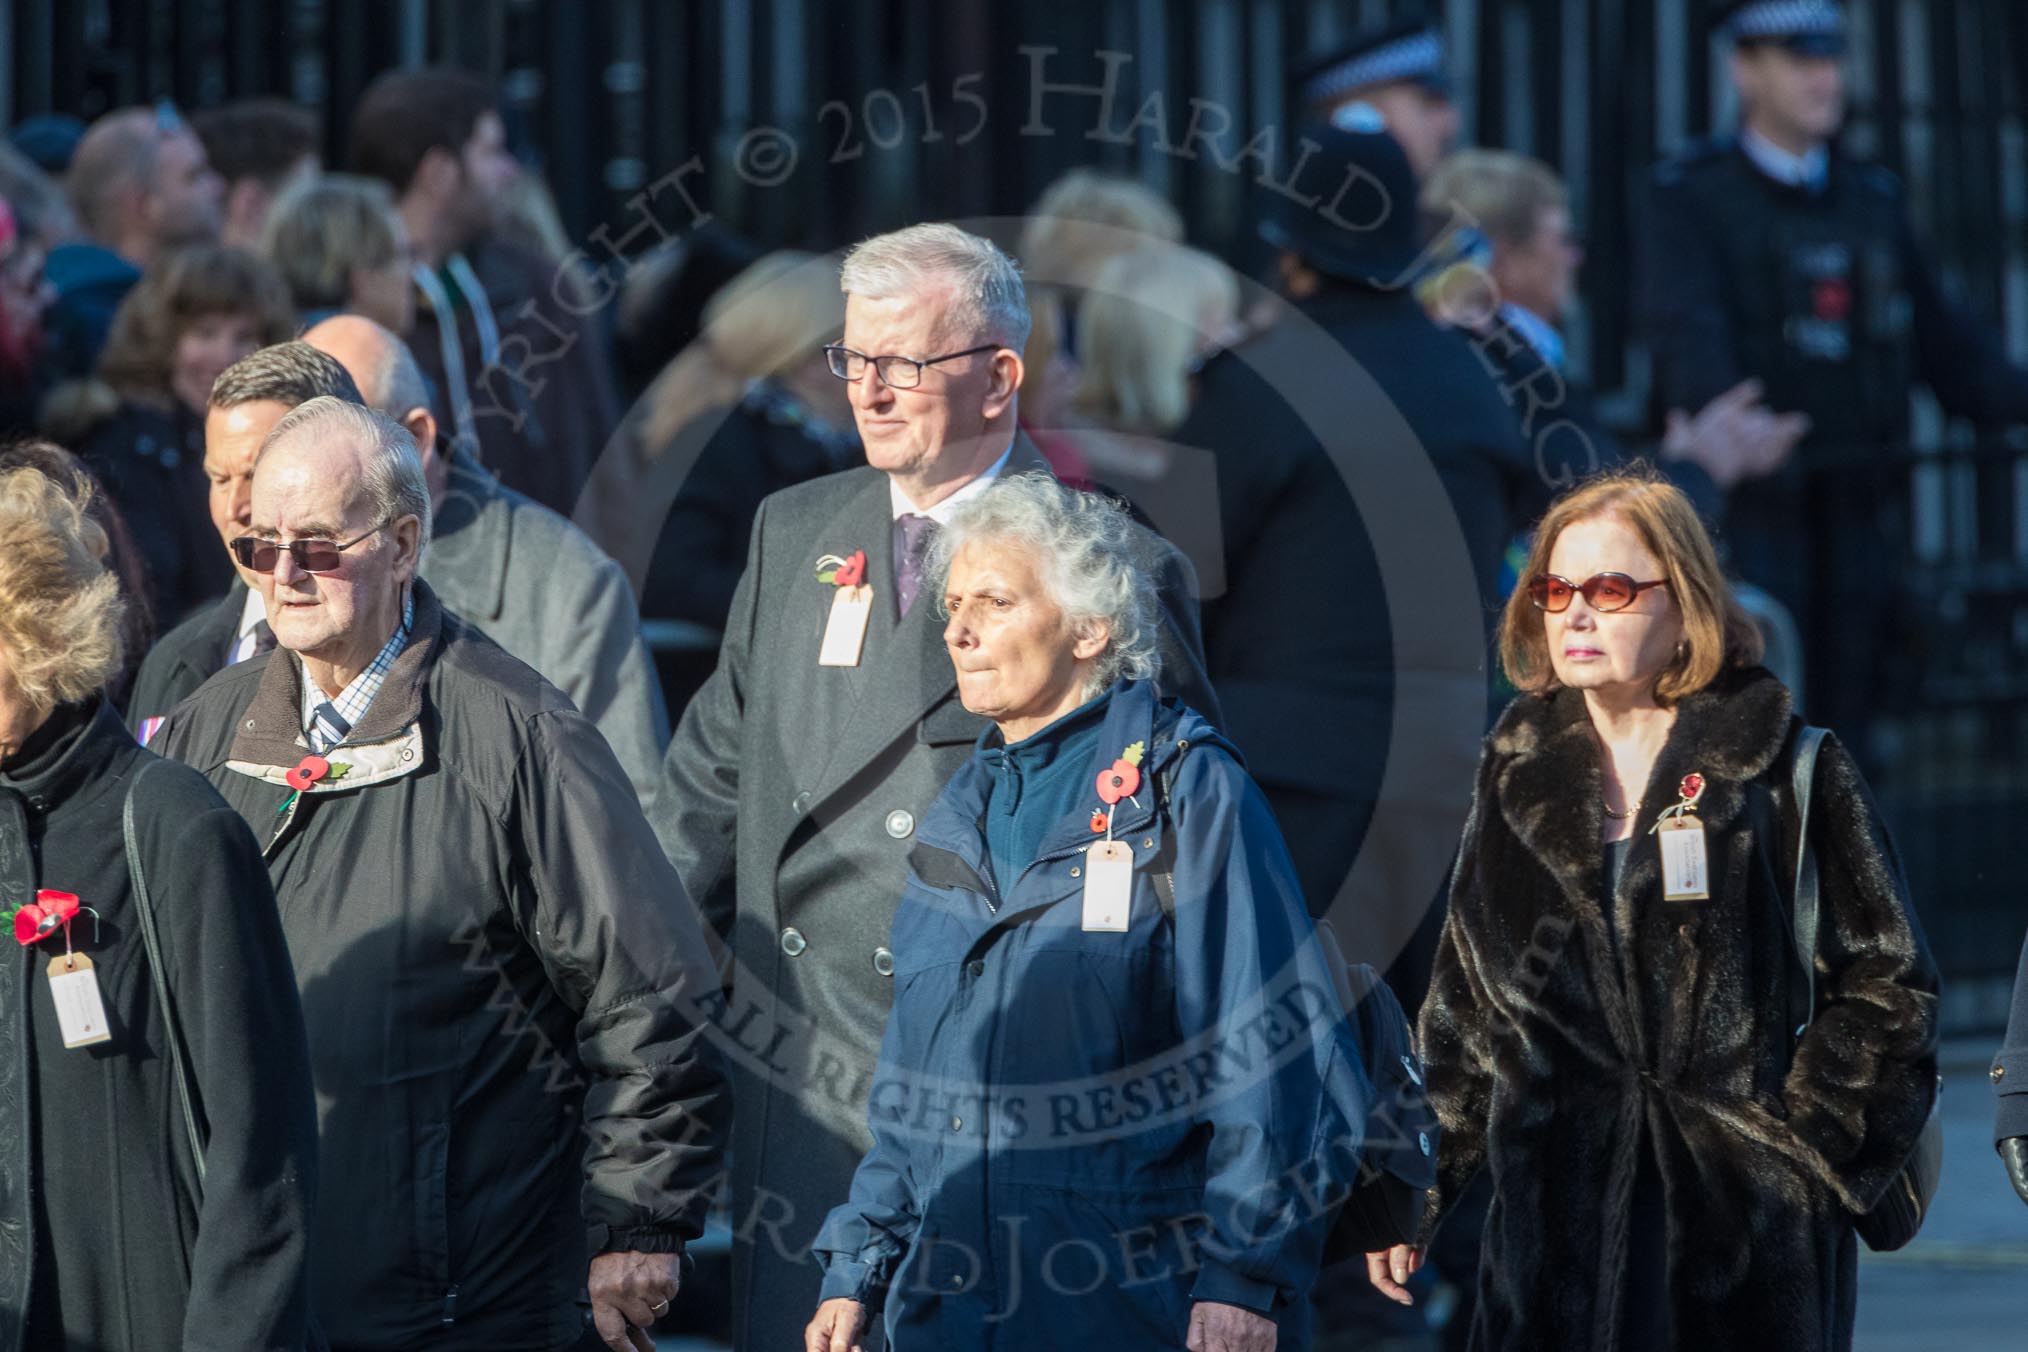 March Past, Remembrance Sunday at the Cenotaph 2016: M49 The British Evacuees Association.
Cenotaph, Whitehall, London SW1,
London,
Greater London,
United Kingdom,
on 13 November 2016 at 13:20, image #3025